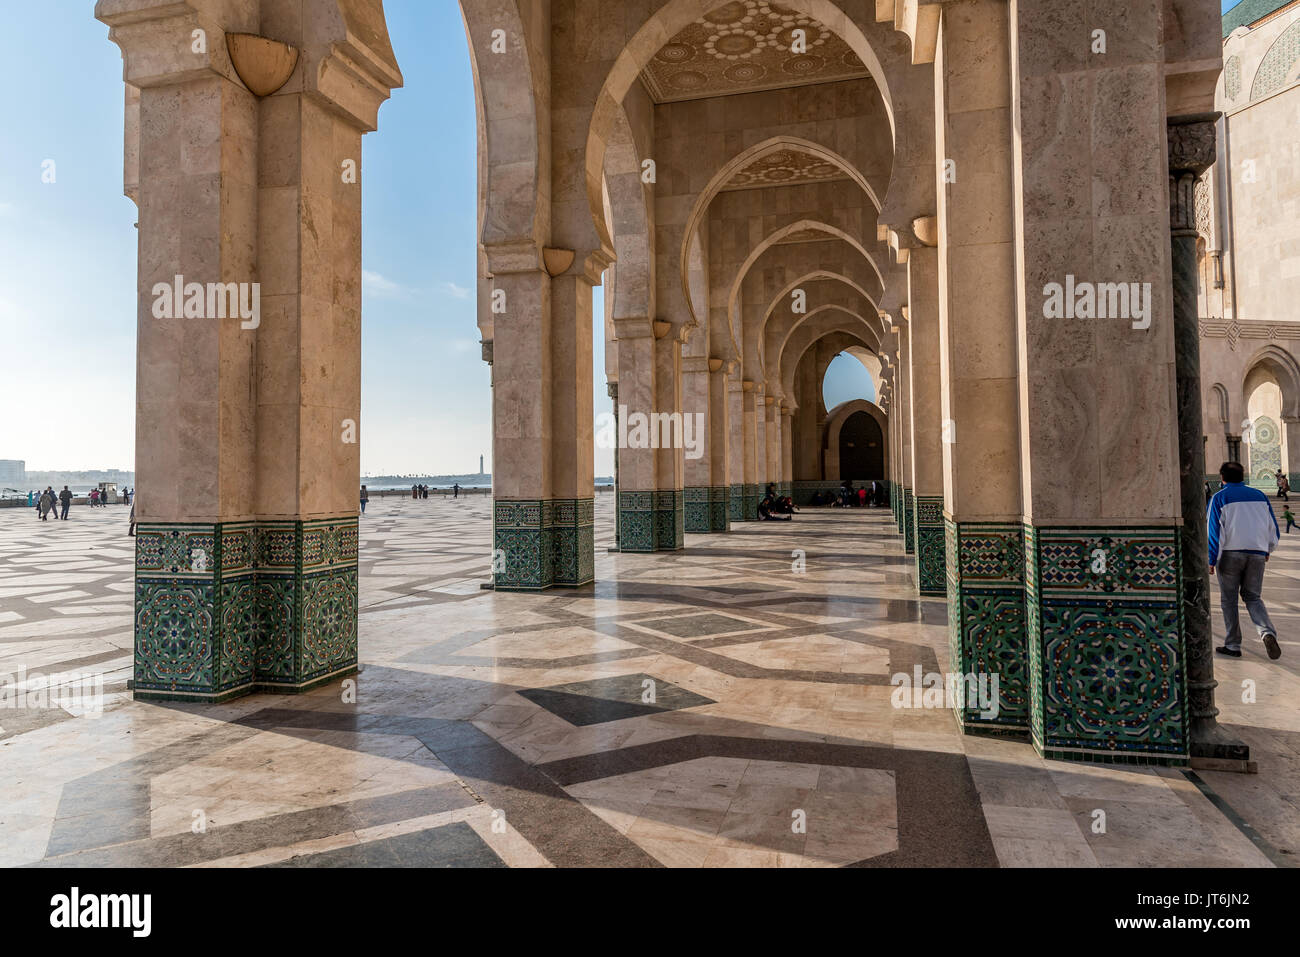 Arcade with islamic decoration, Mosque Hassan II in Casablanca, Morocco Stock Photo